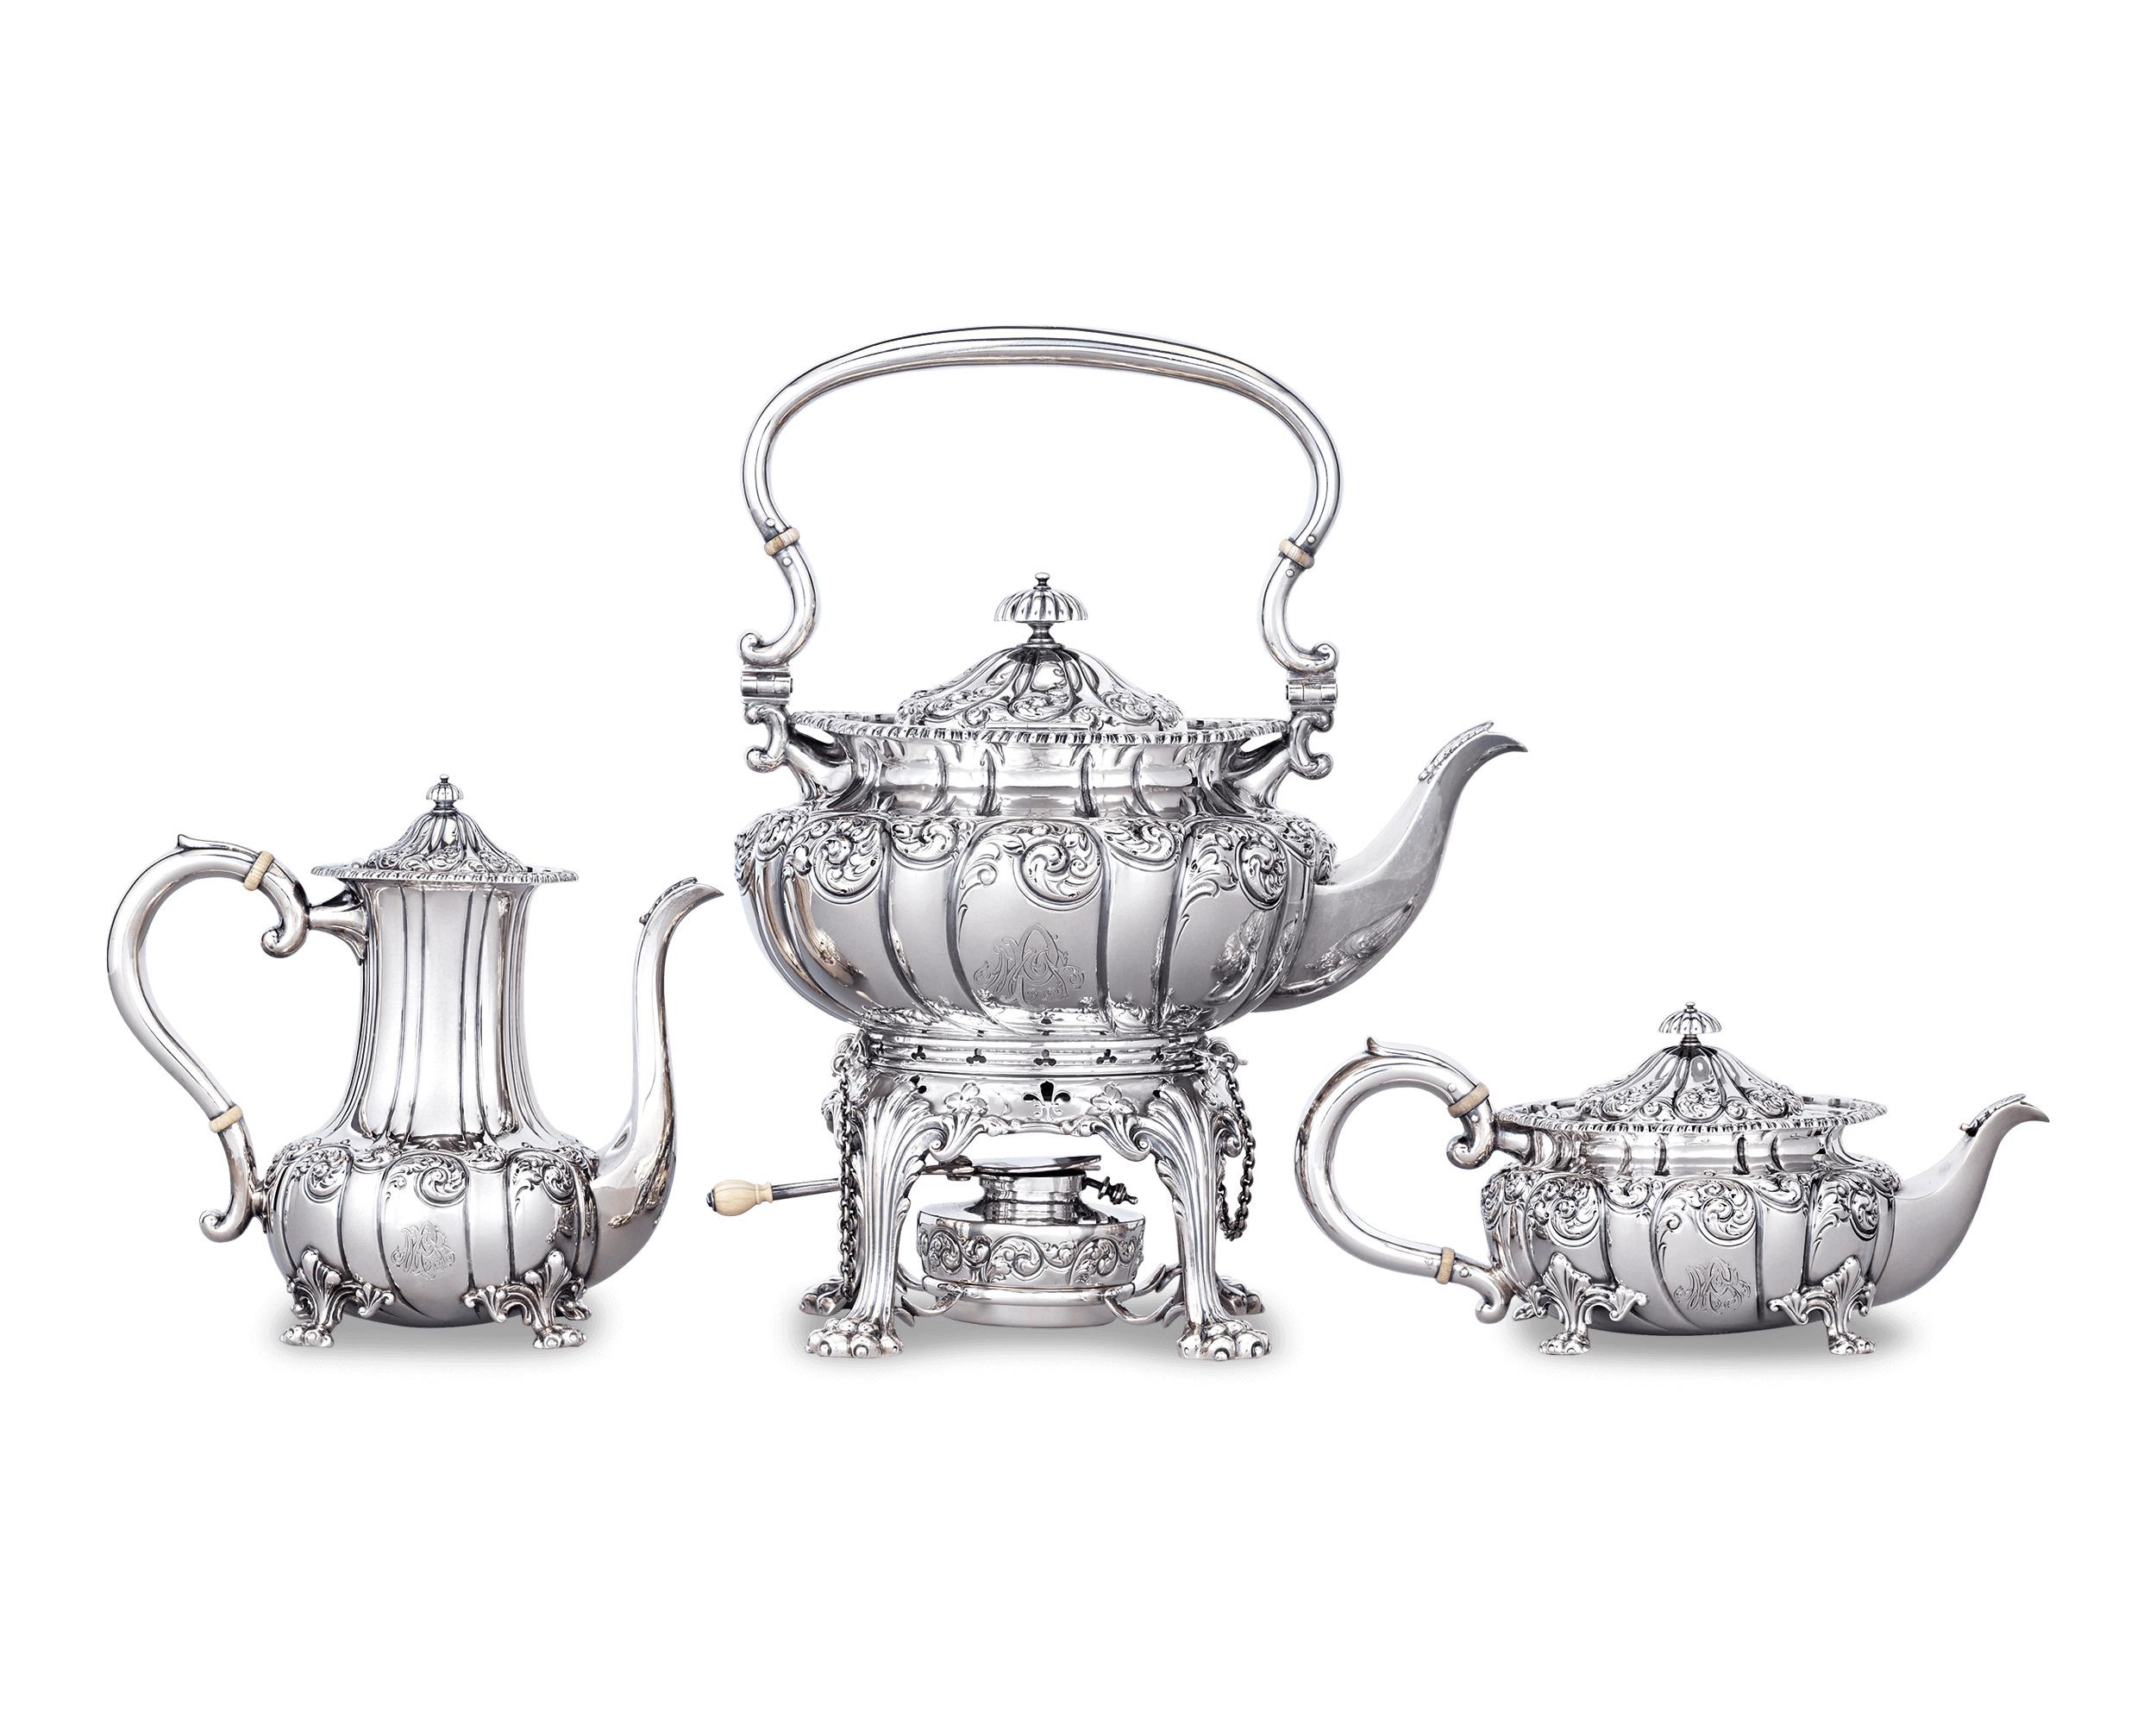 This rare and luxurious Victorian sterling silver tea and coffee service was crafted by New York silversmiths Howard & Co. Each piece — including a water kettle, tea pot, coffee urn, sugar, creamer, a waste bowl and bunsen warmer — has been